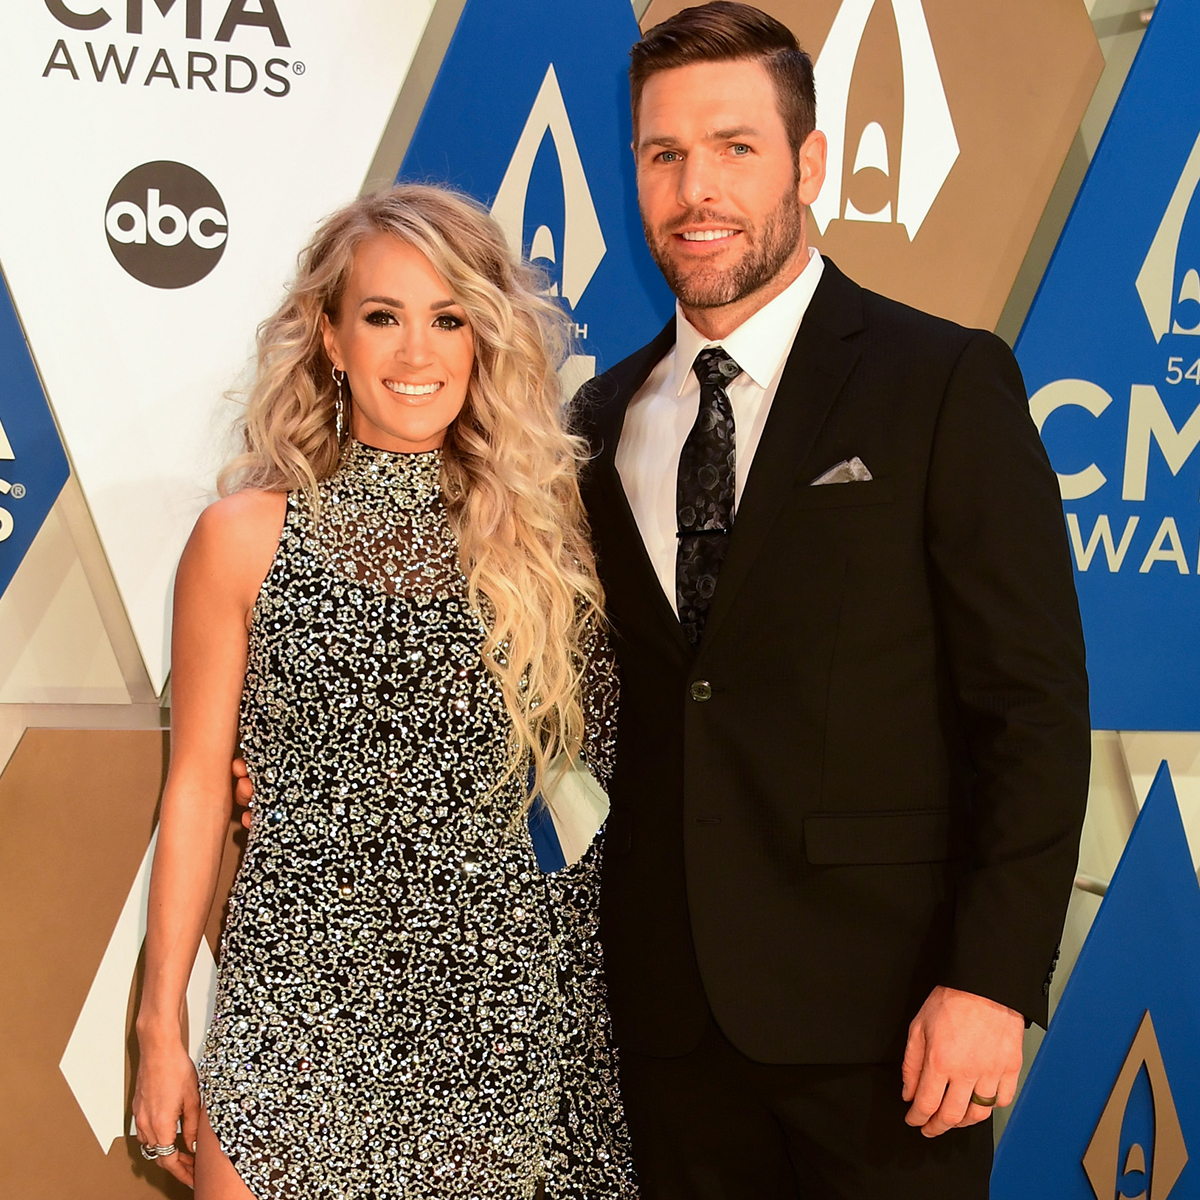 Carrie Underwood's husband Mike Fisher parodies 'Before He Cheats